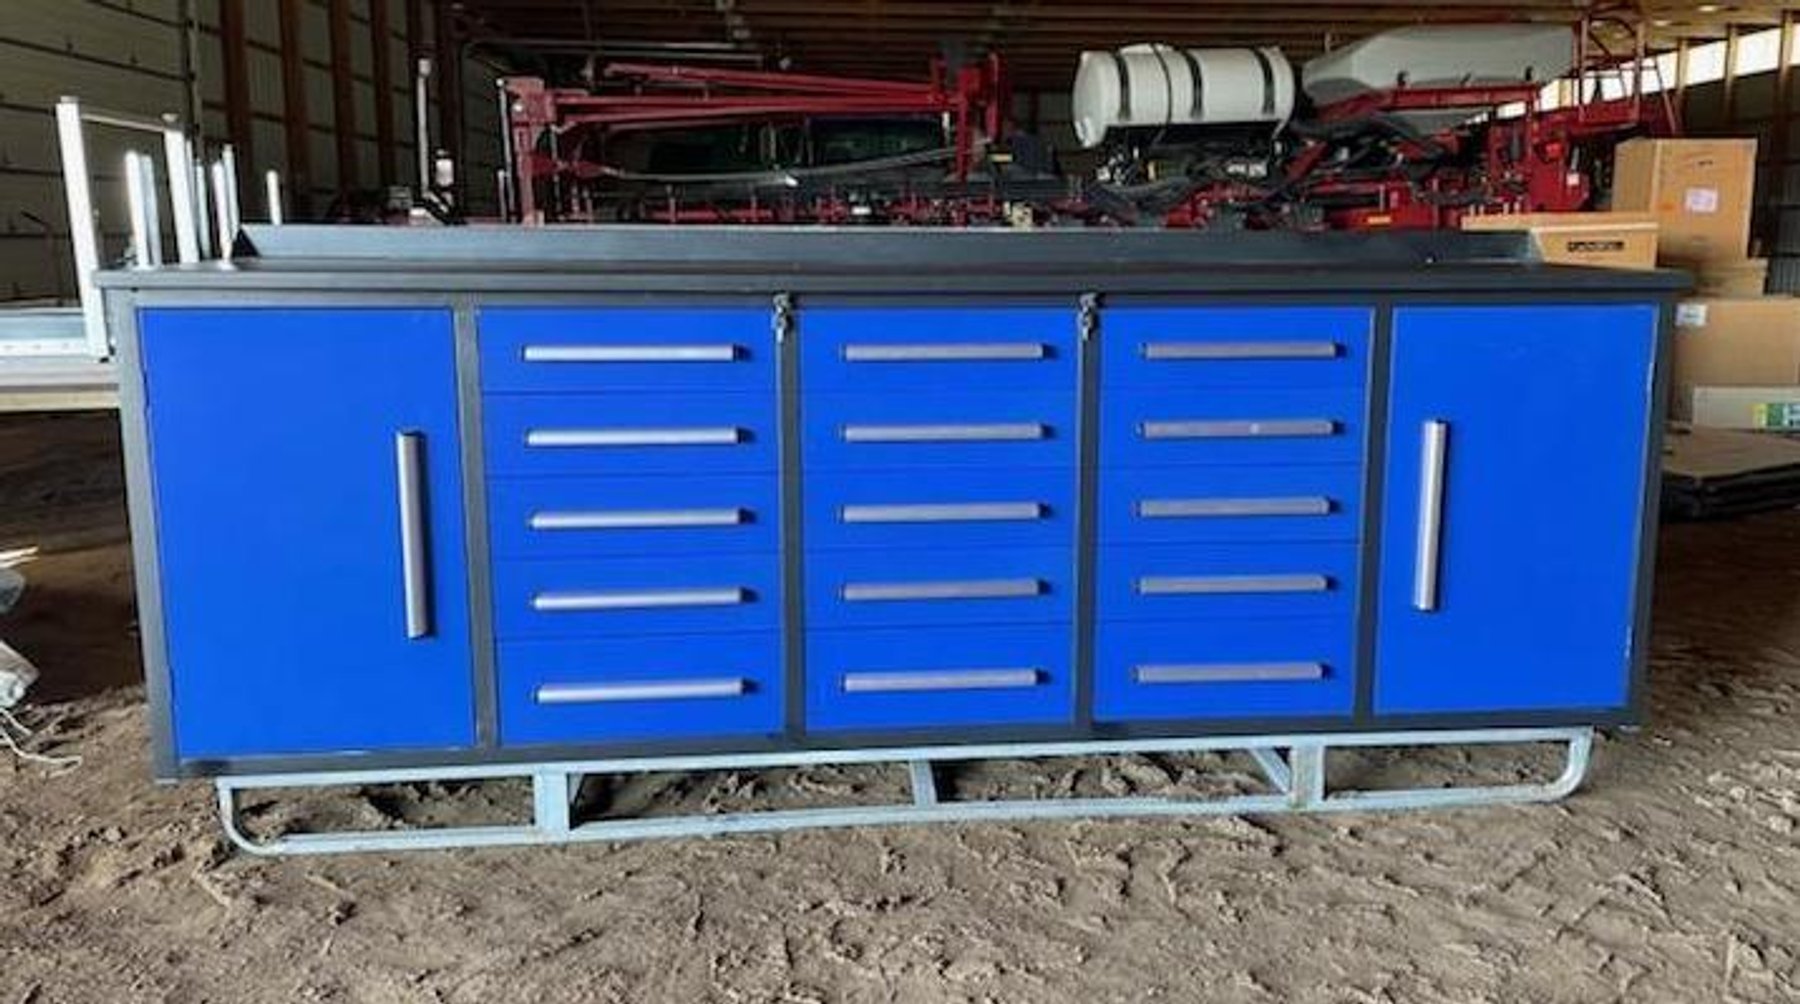 New Storage Buildings, Tires, Tool Benches, Wire Fencing, Attachments